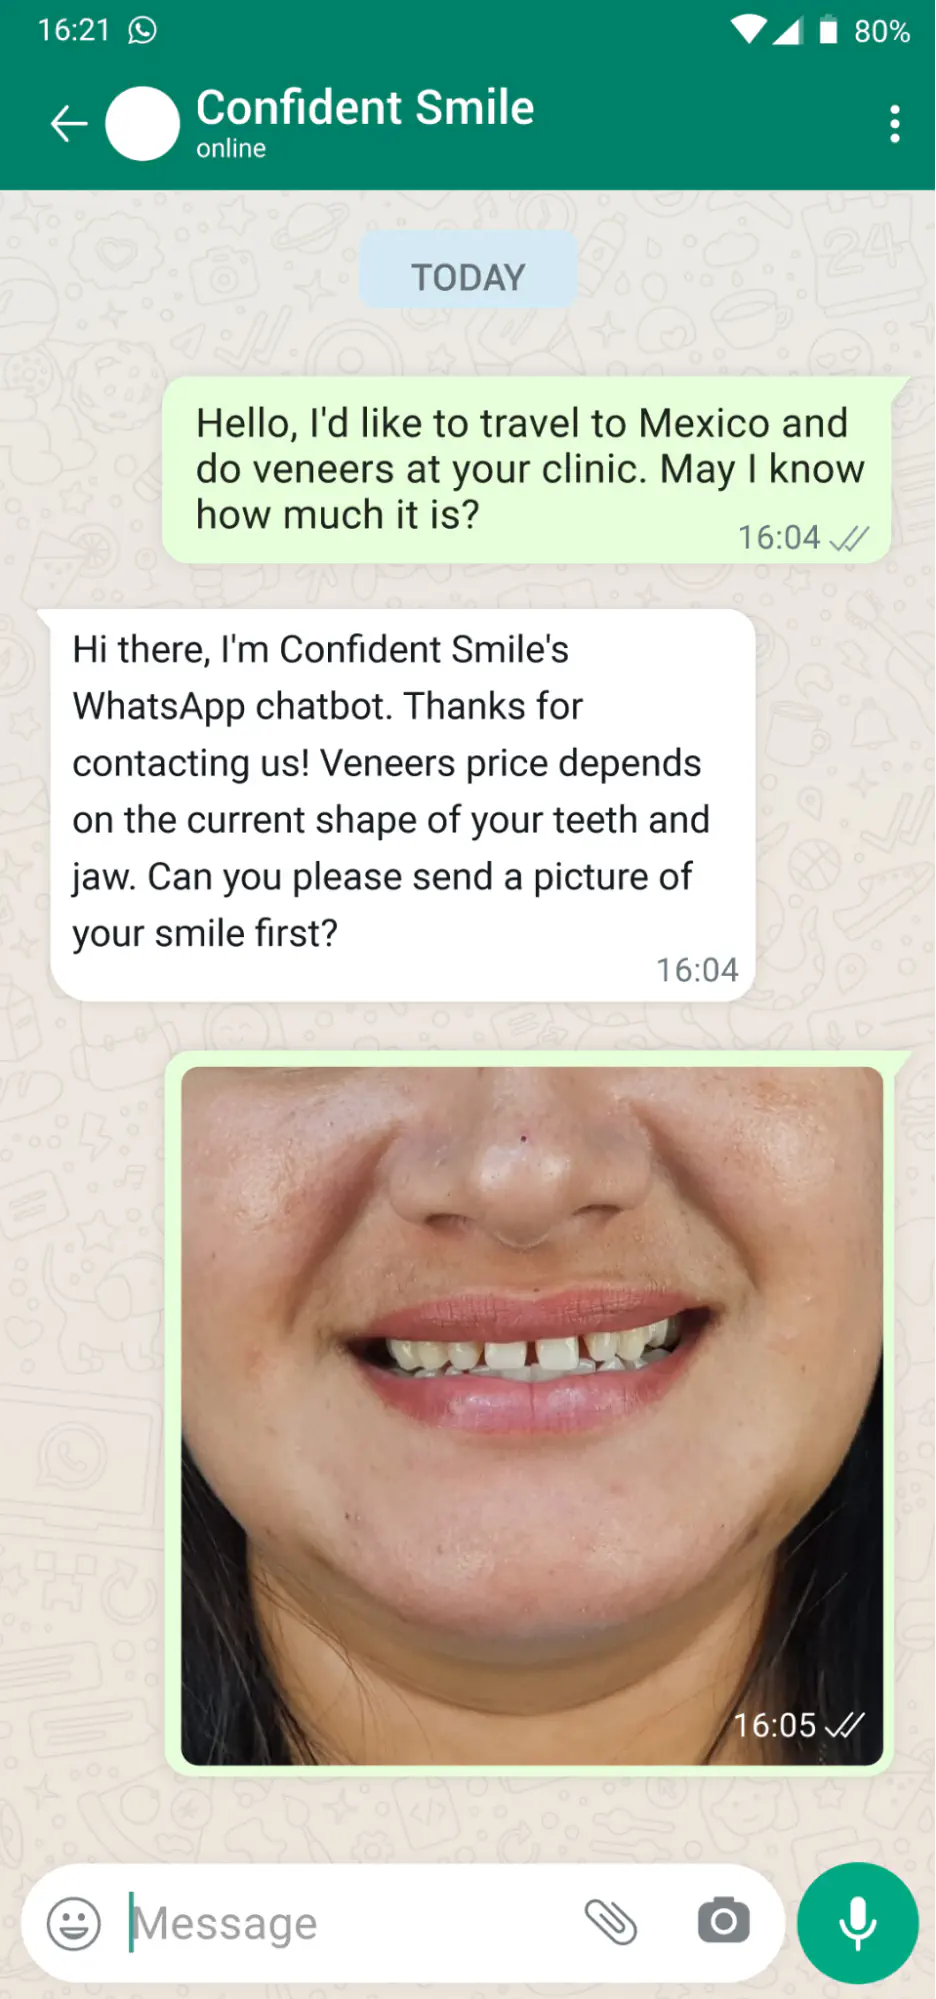 WhatsApp chatbot asking a patient for photos over WhatsApp.